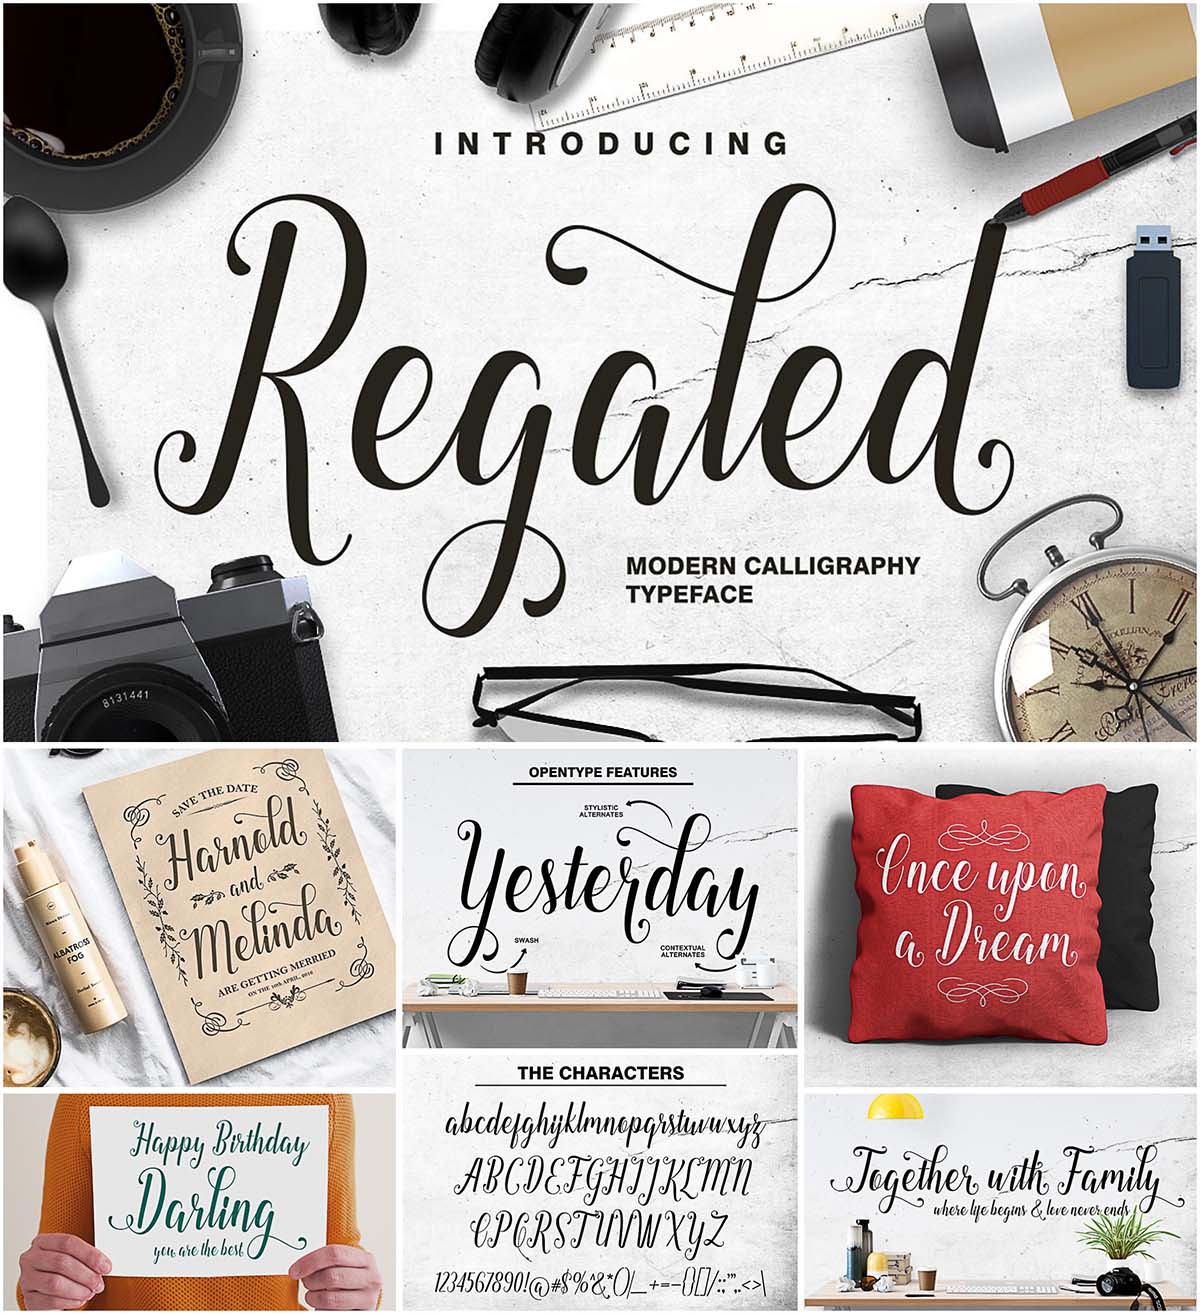 Regaled modern calligraphy typeface